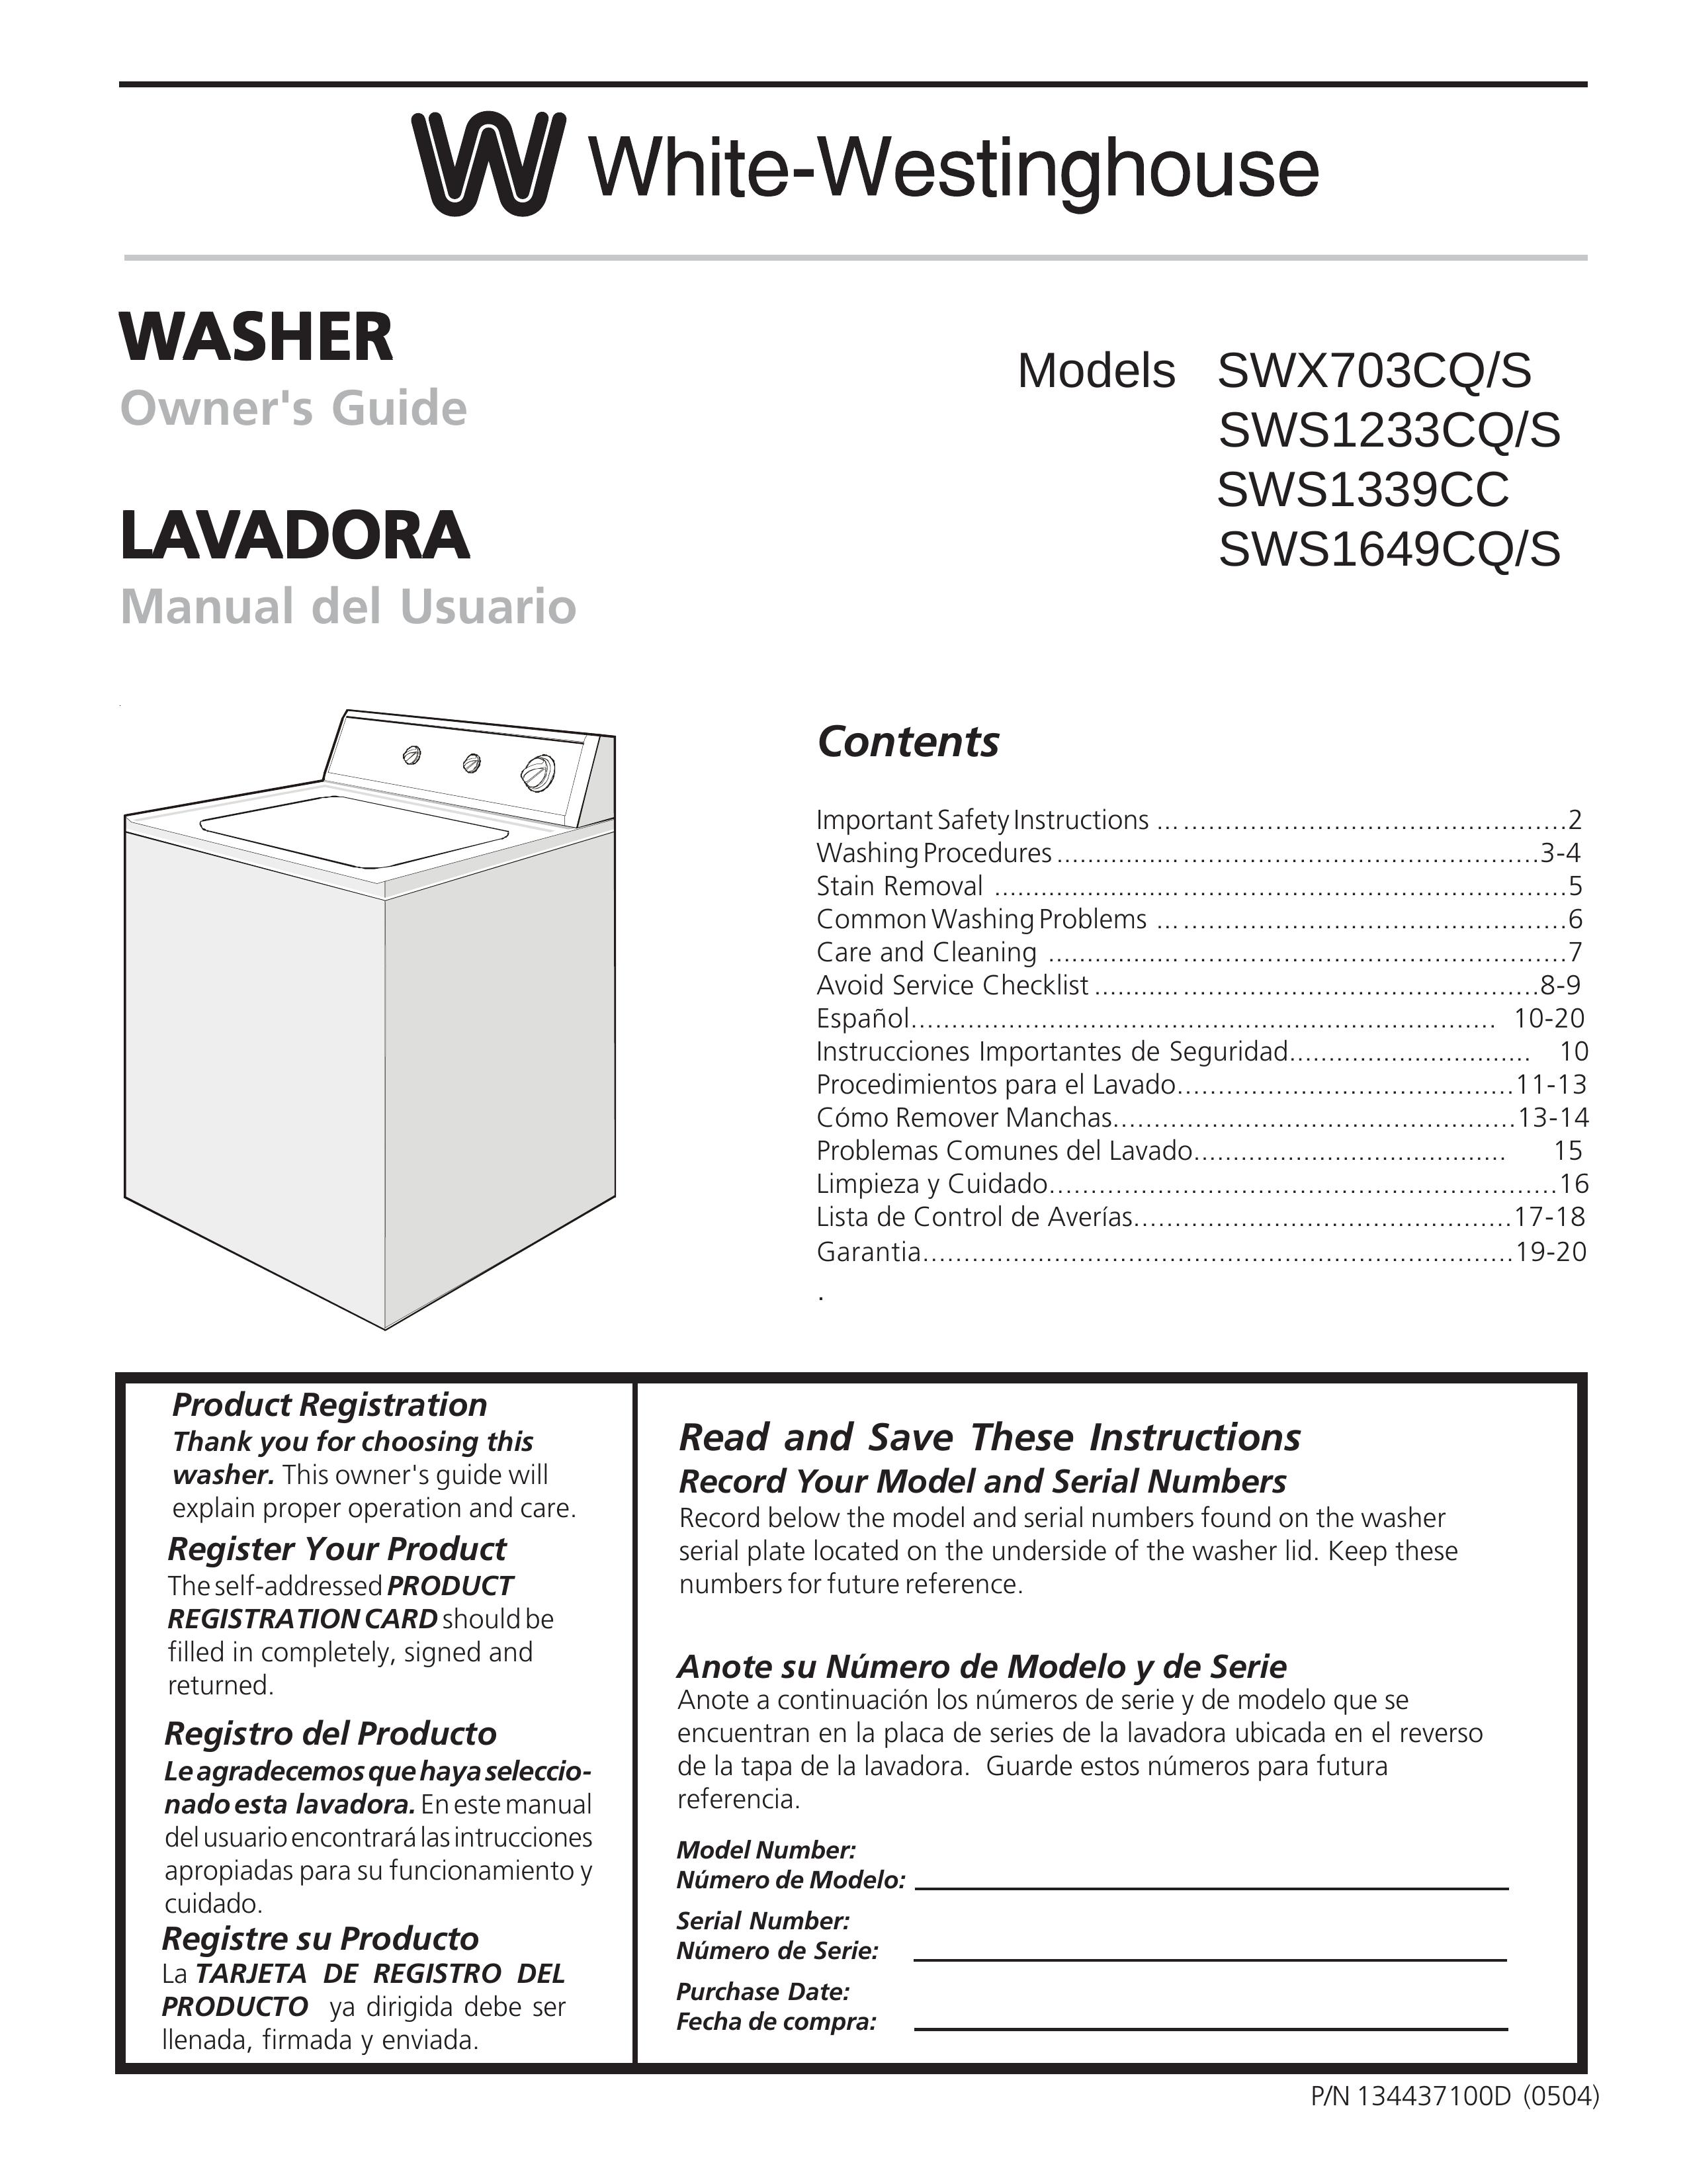 White-Westinghouse SWS1339CC Washer User Manual